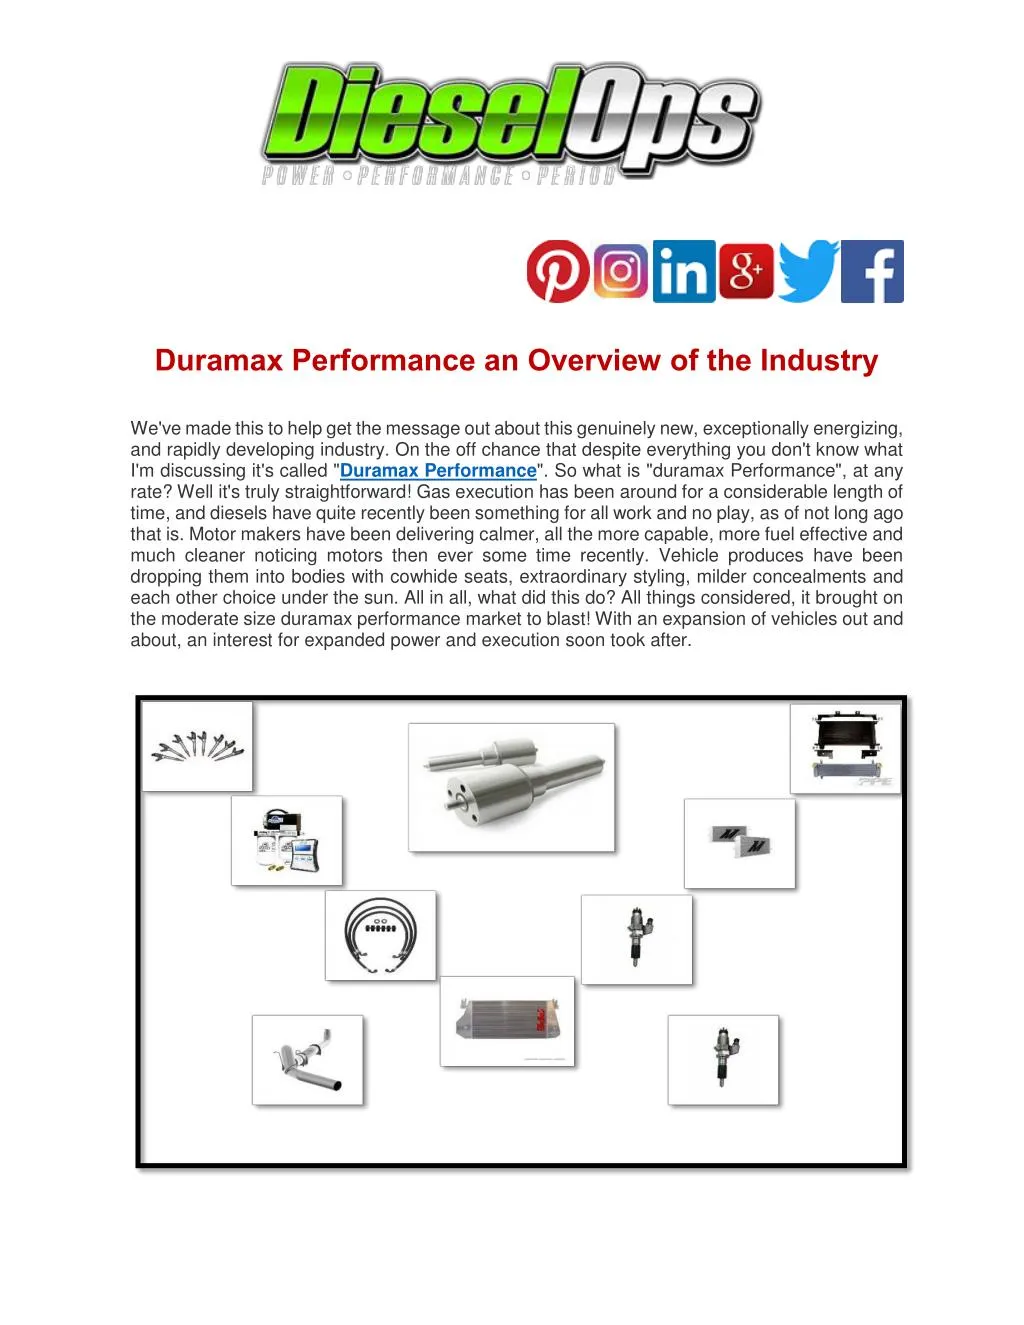 duramax performance an overview of the industry